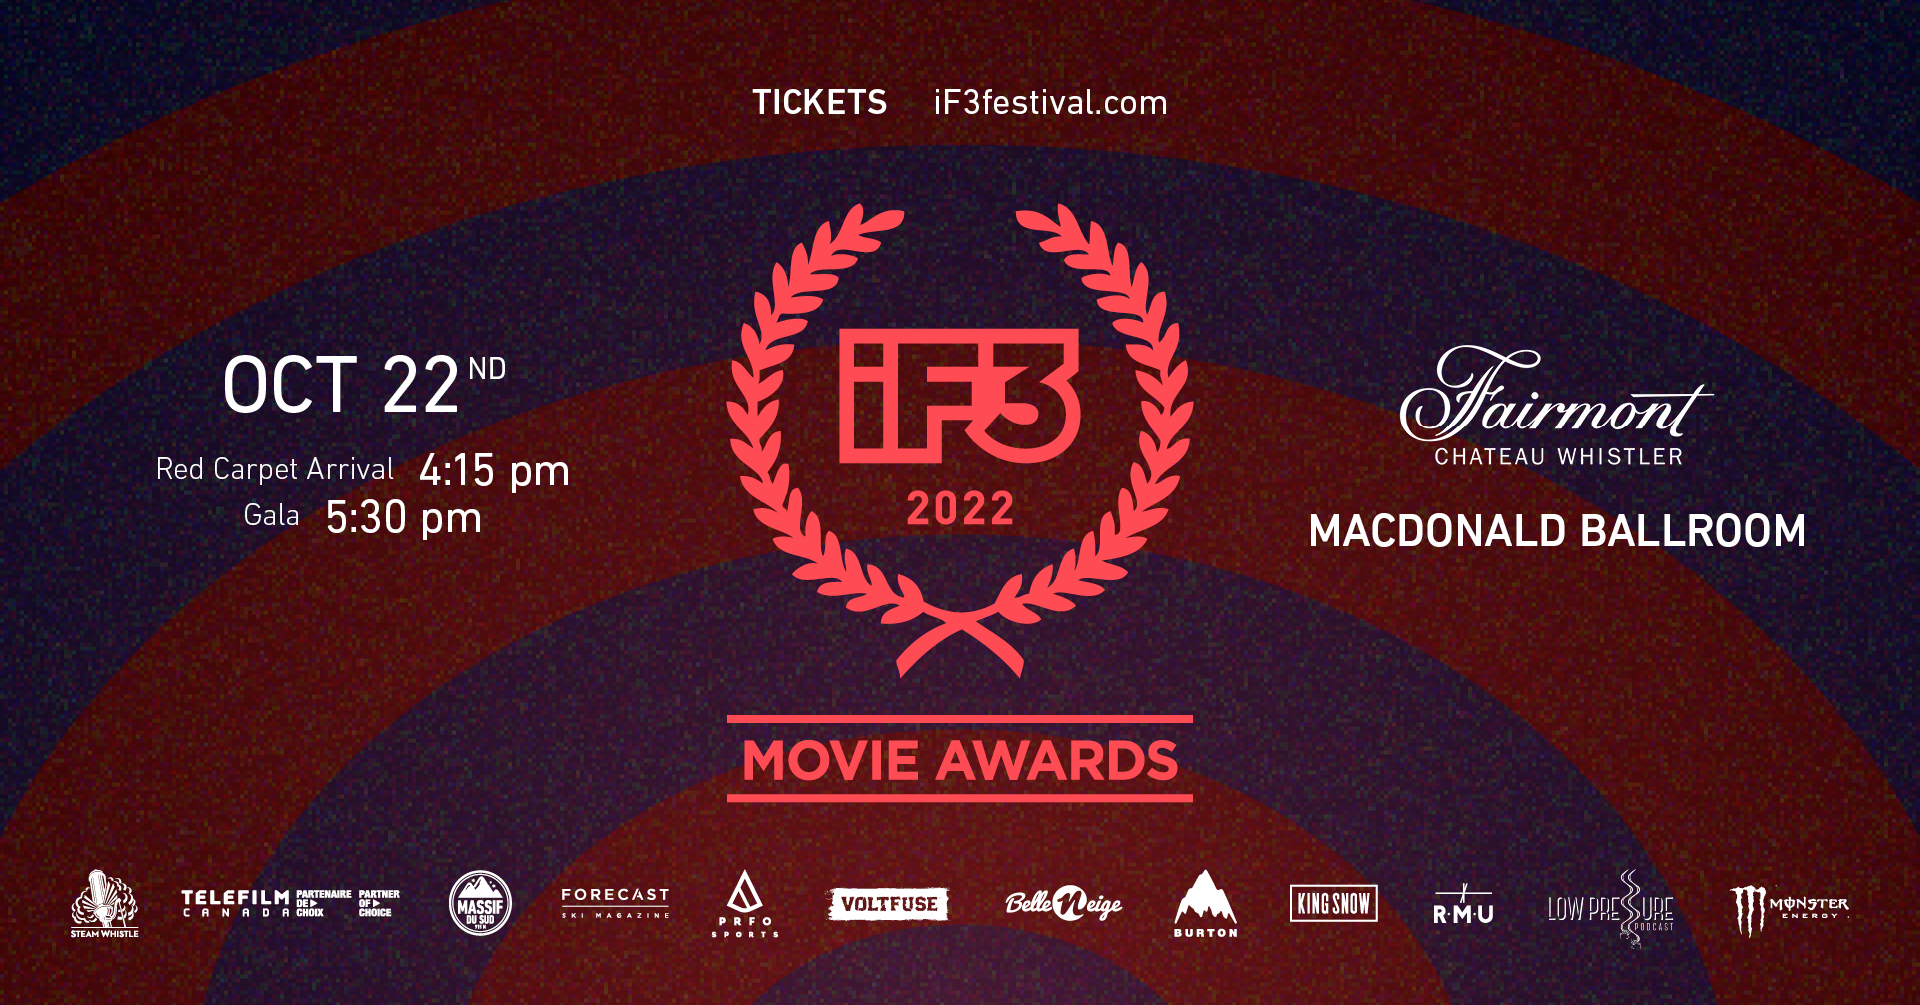 iF3 Movie Awards Nominees 2022 announced